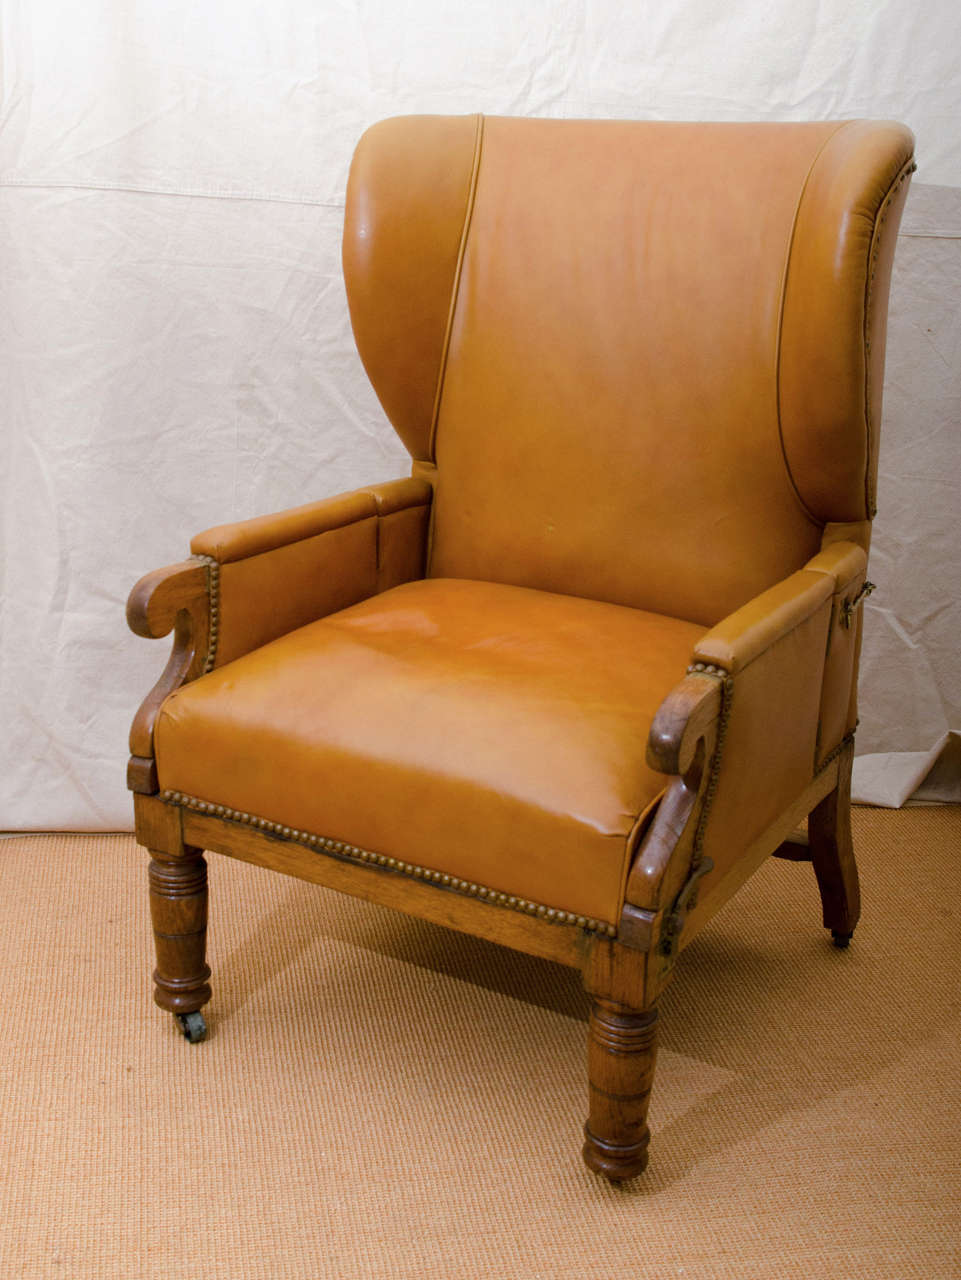 English early 19th century leather covered invalid's wing chair. The chair adjusts and the arms fold out by lifting up brass levers at each front side. The back has brass hooks on each side that when released lets the back recline (see image 6 and